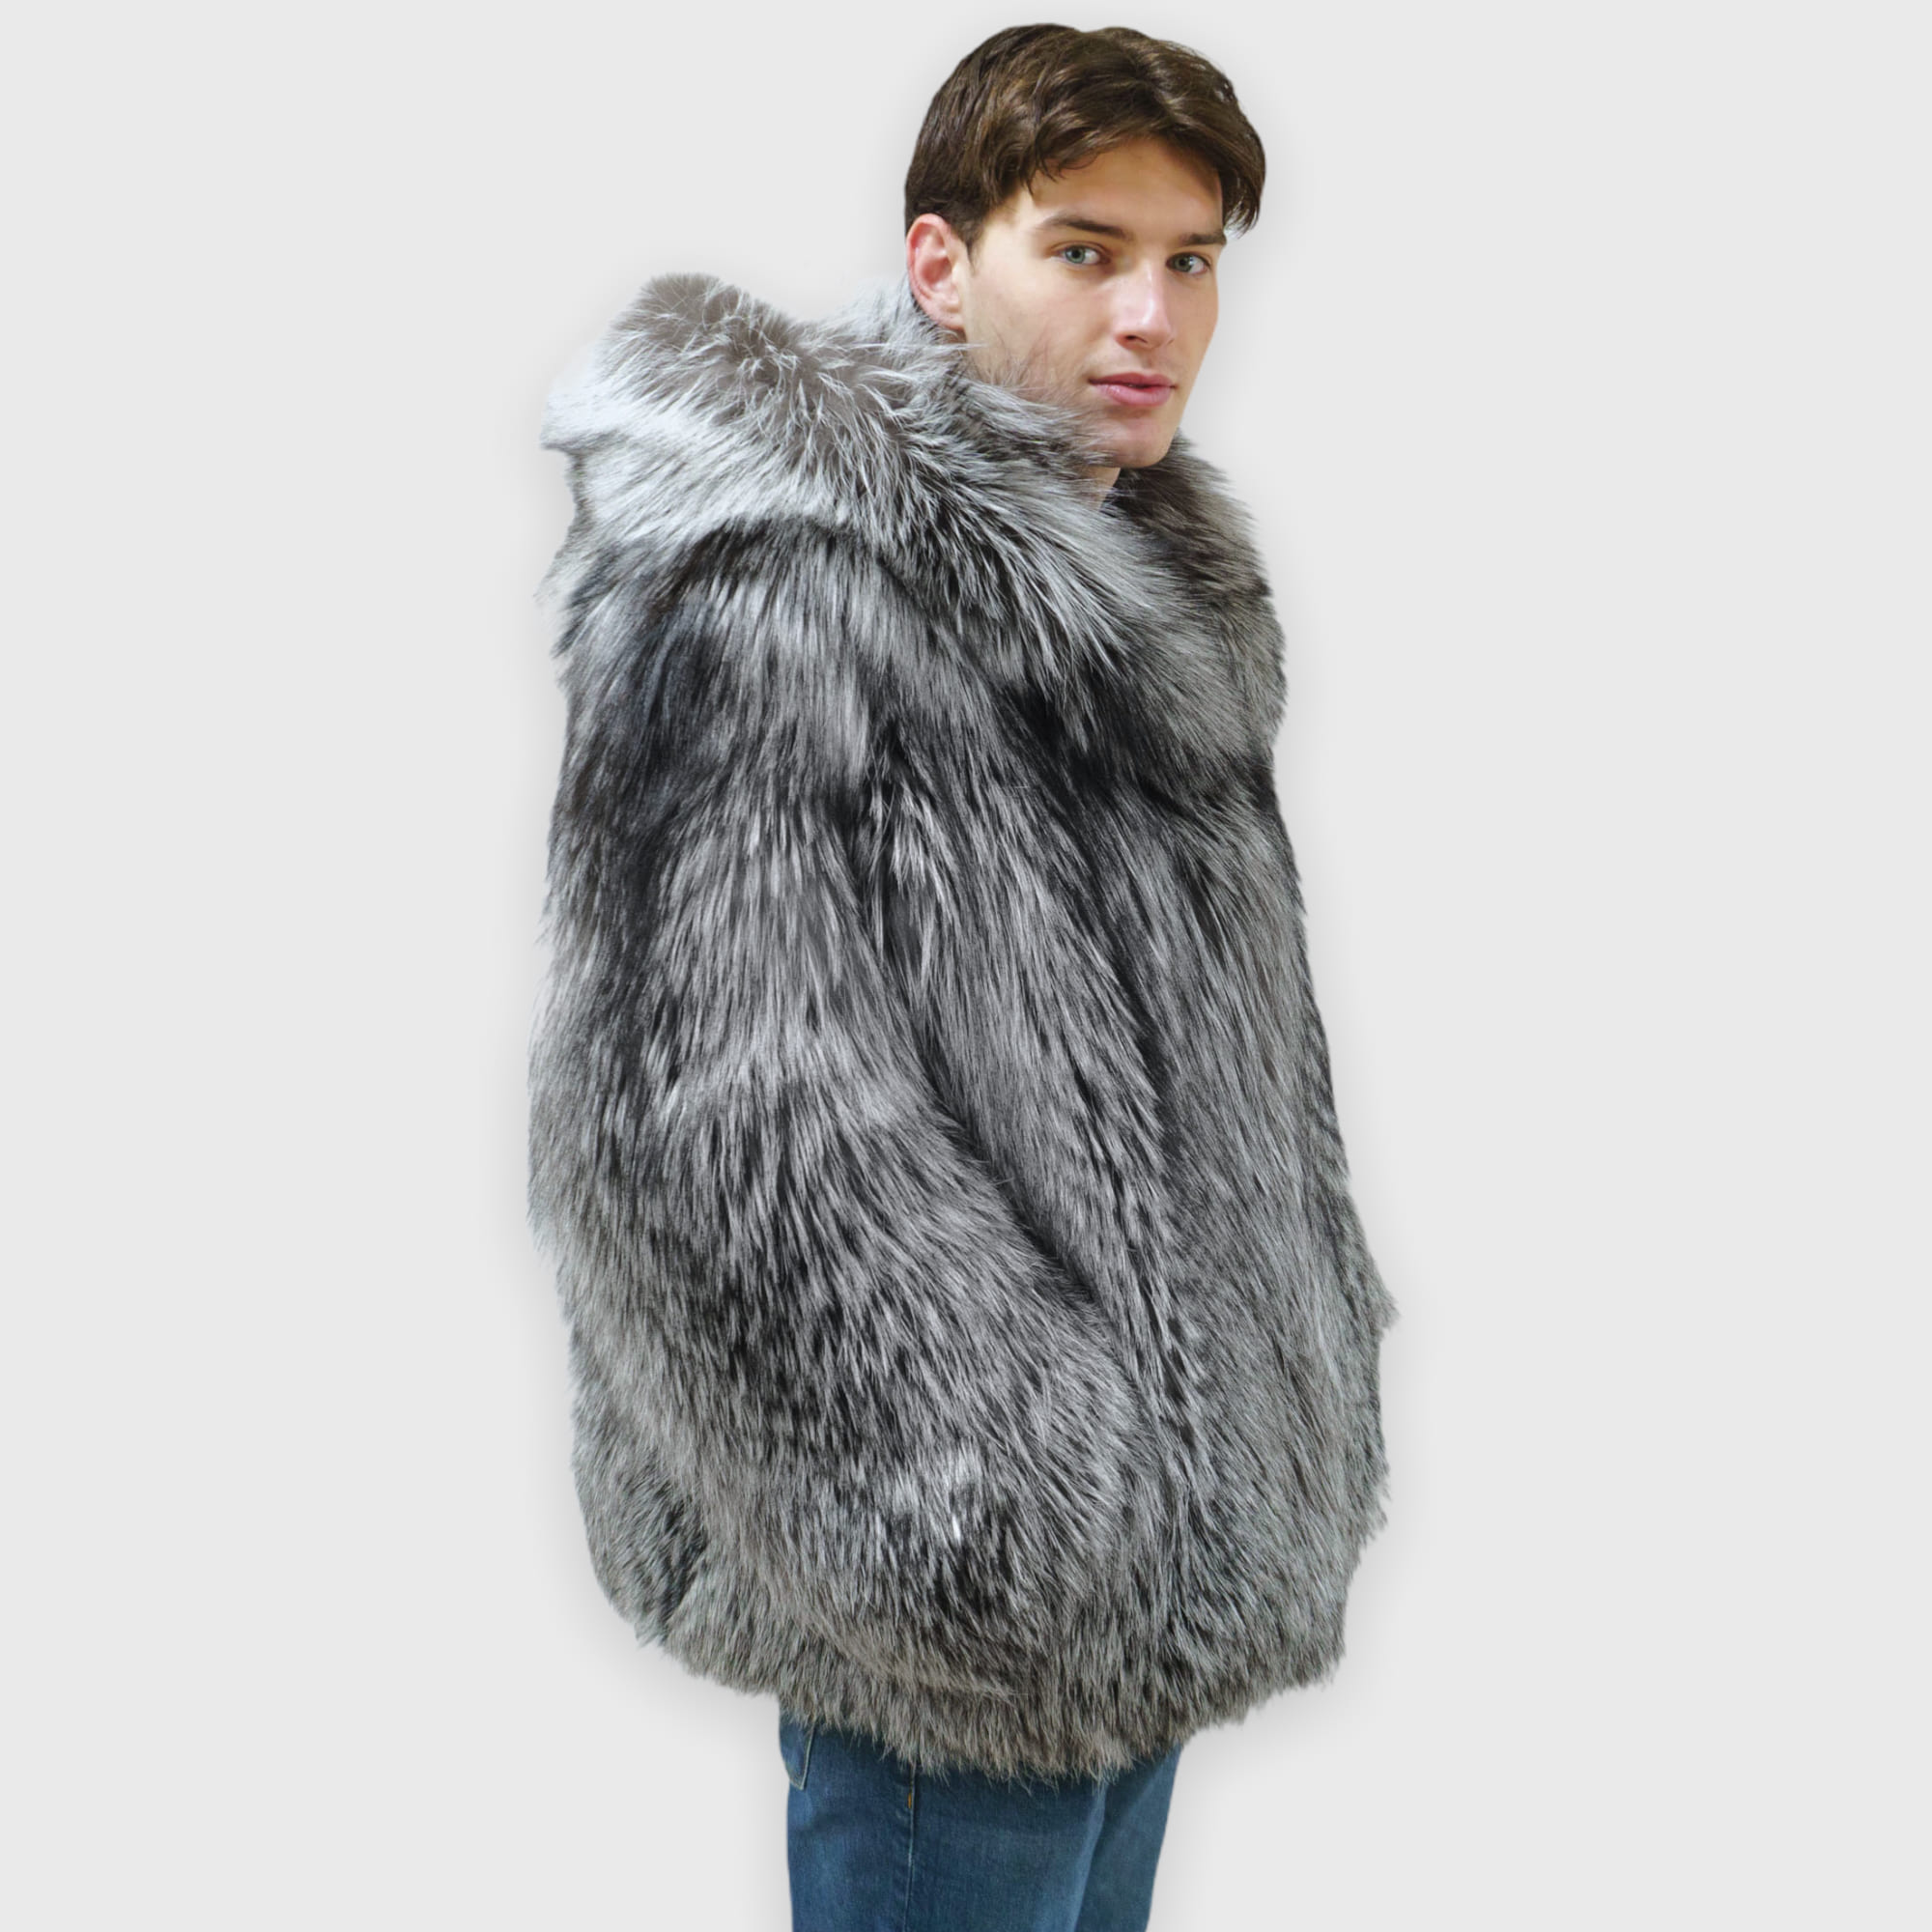 Fox fur jacket with a hood in silver color